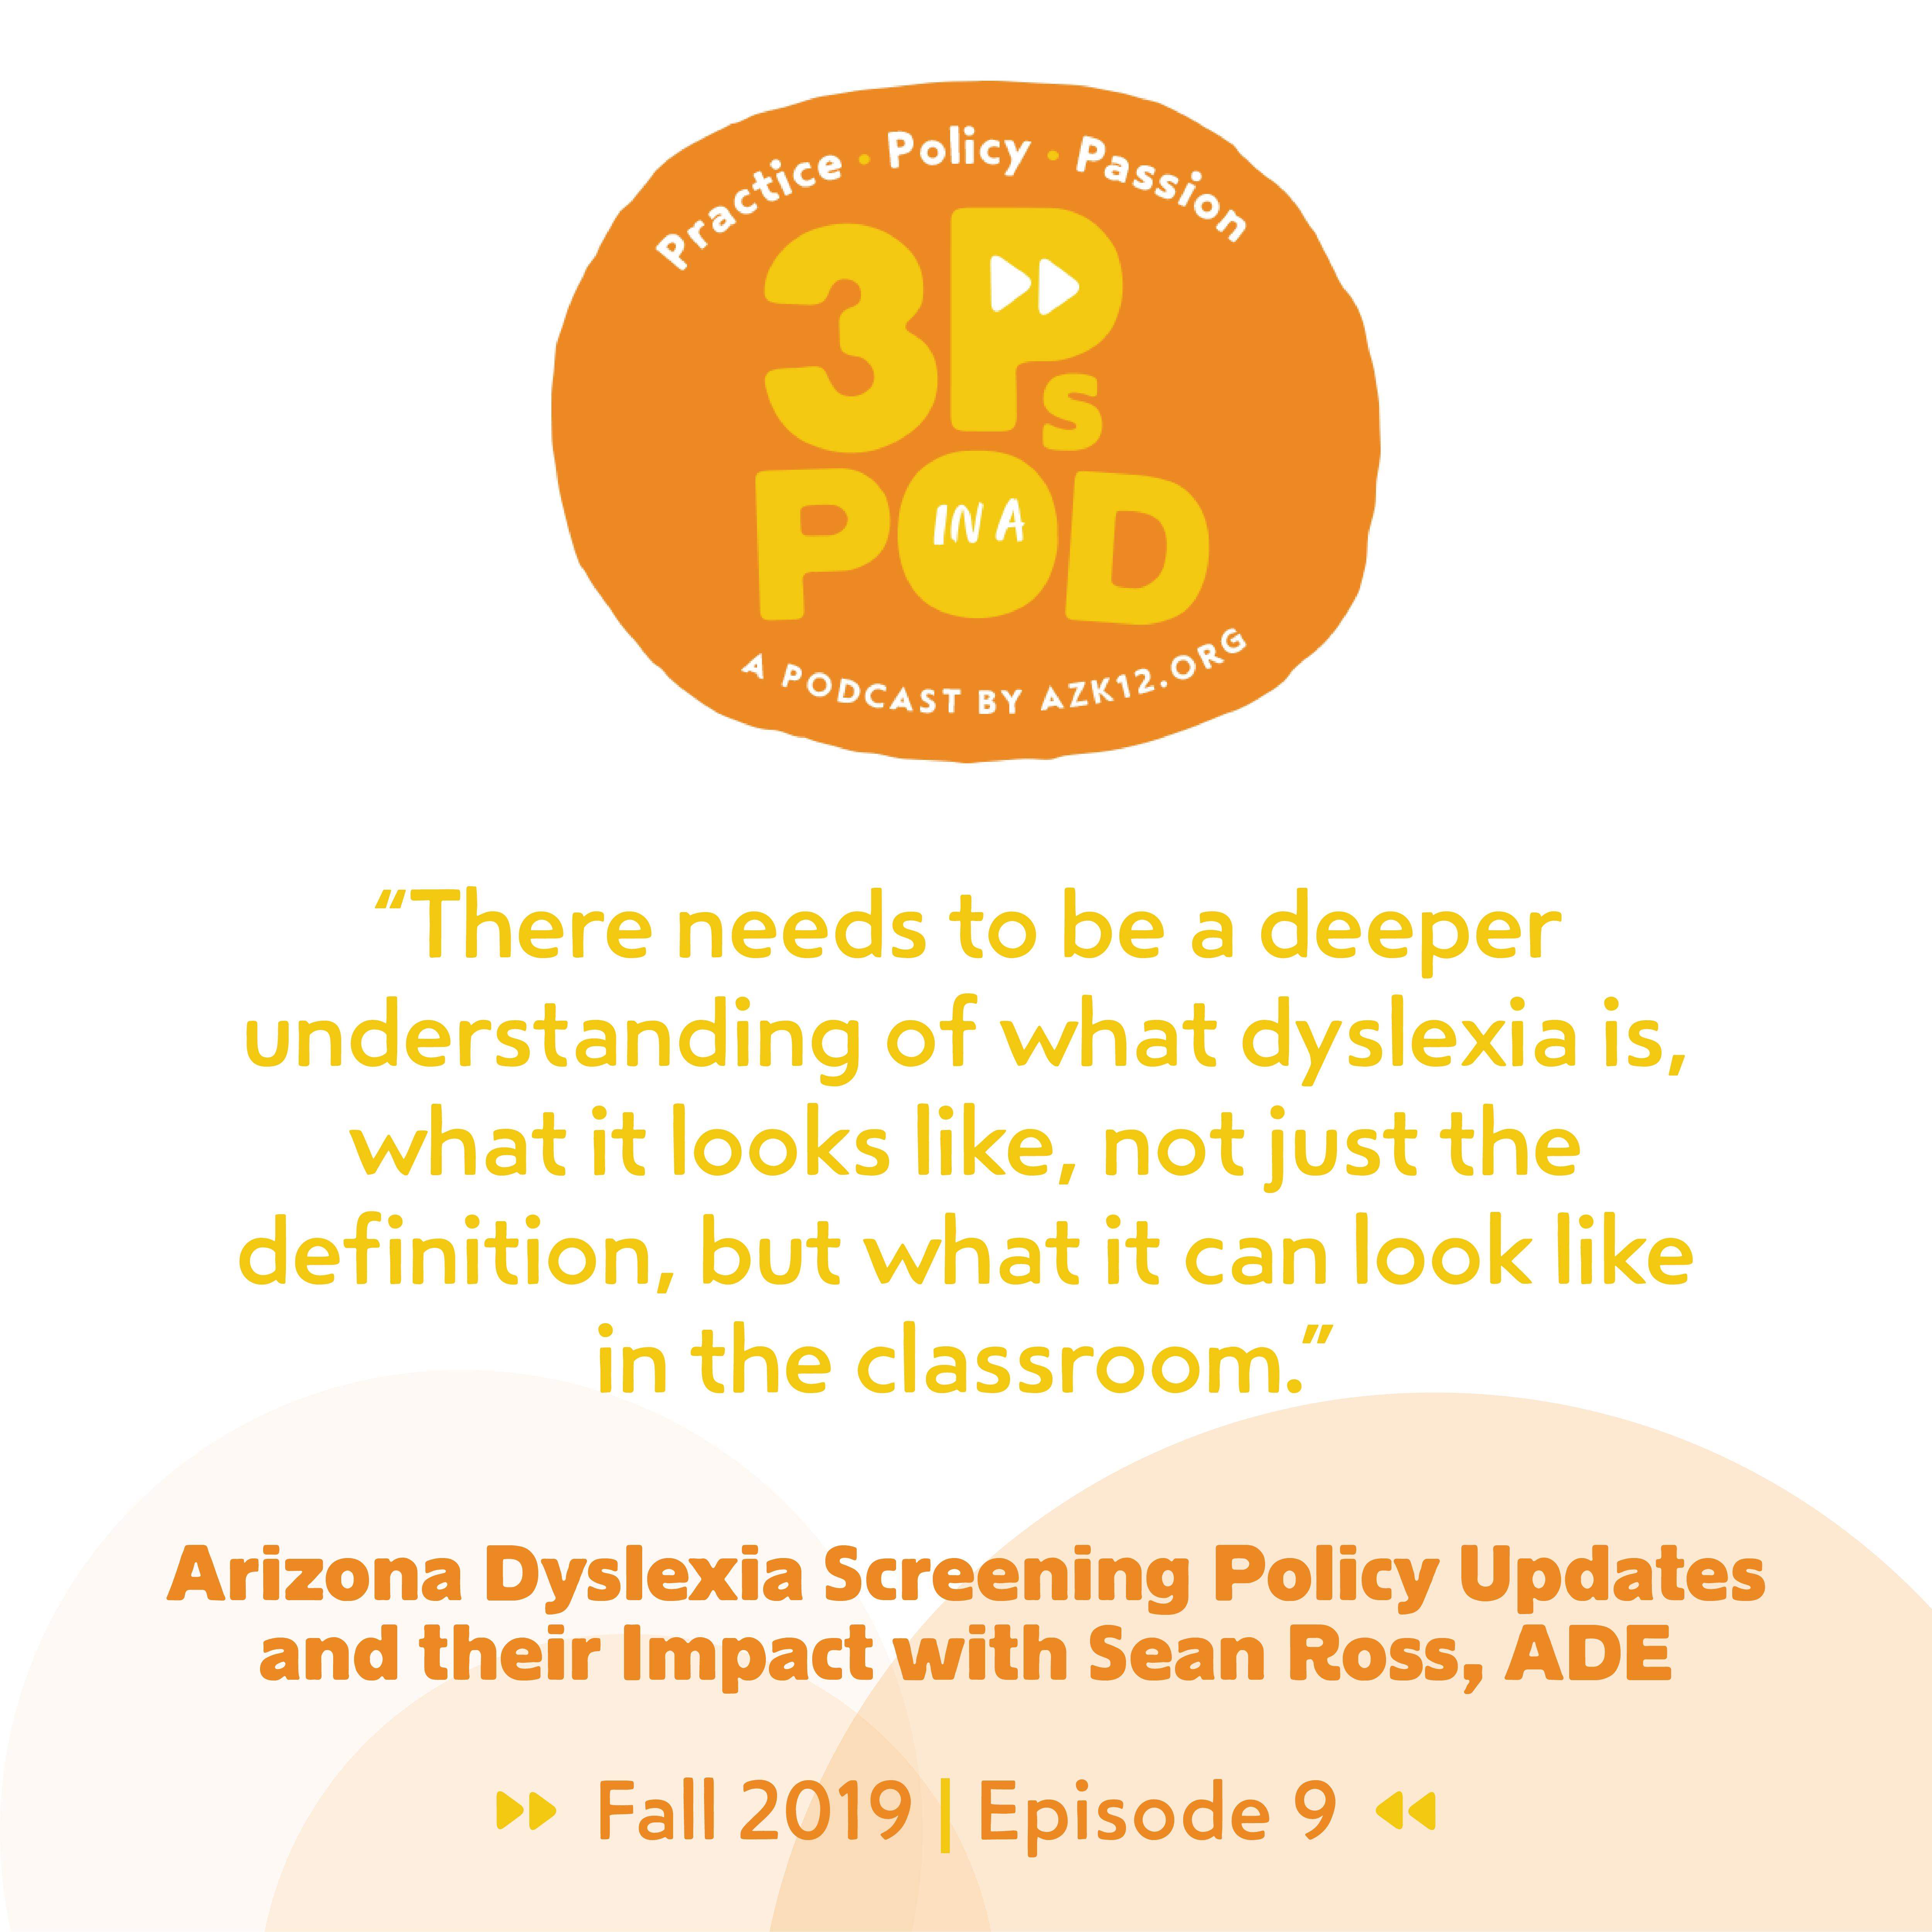 More from "Arizona Dyslexia Screening Policy Updates and their Impact with Sean Ross"